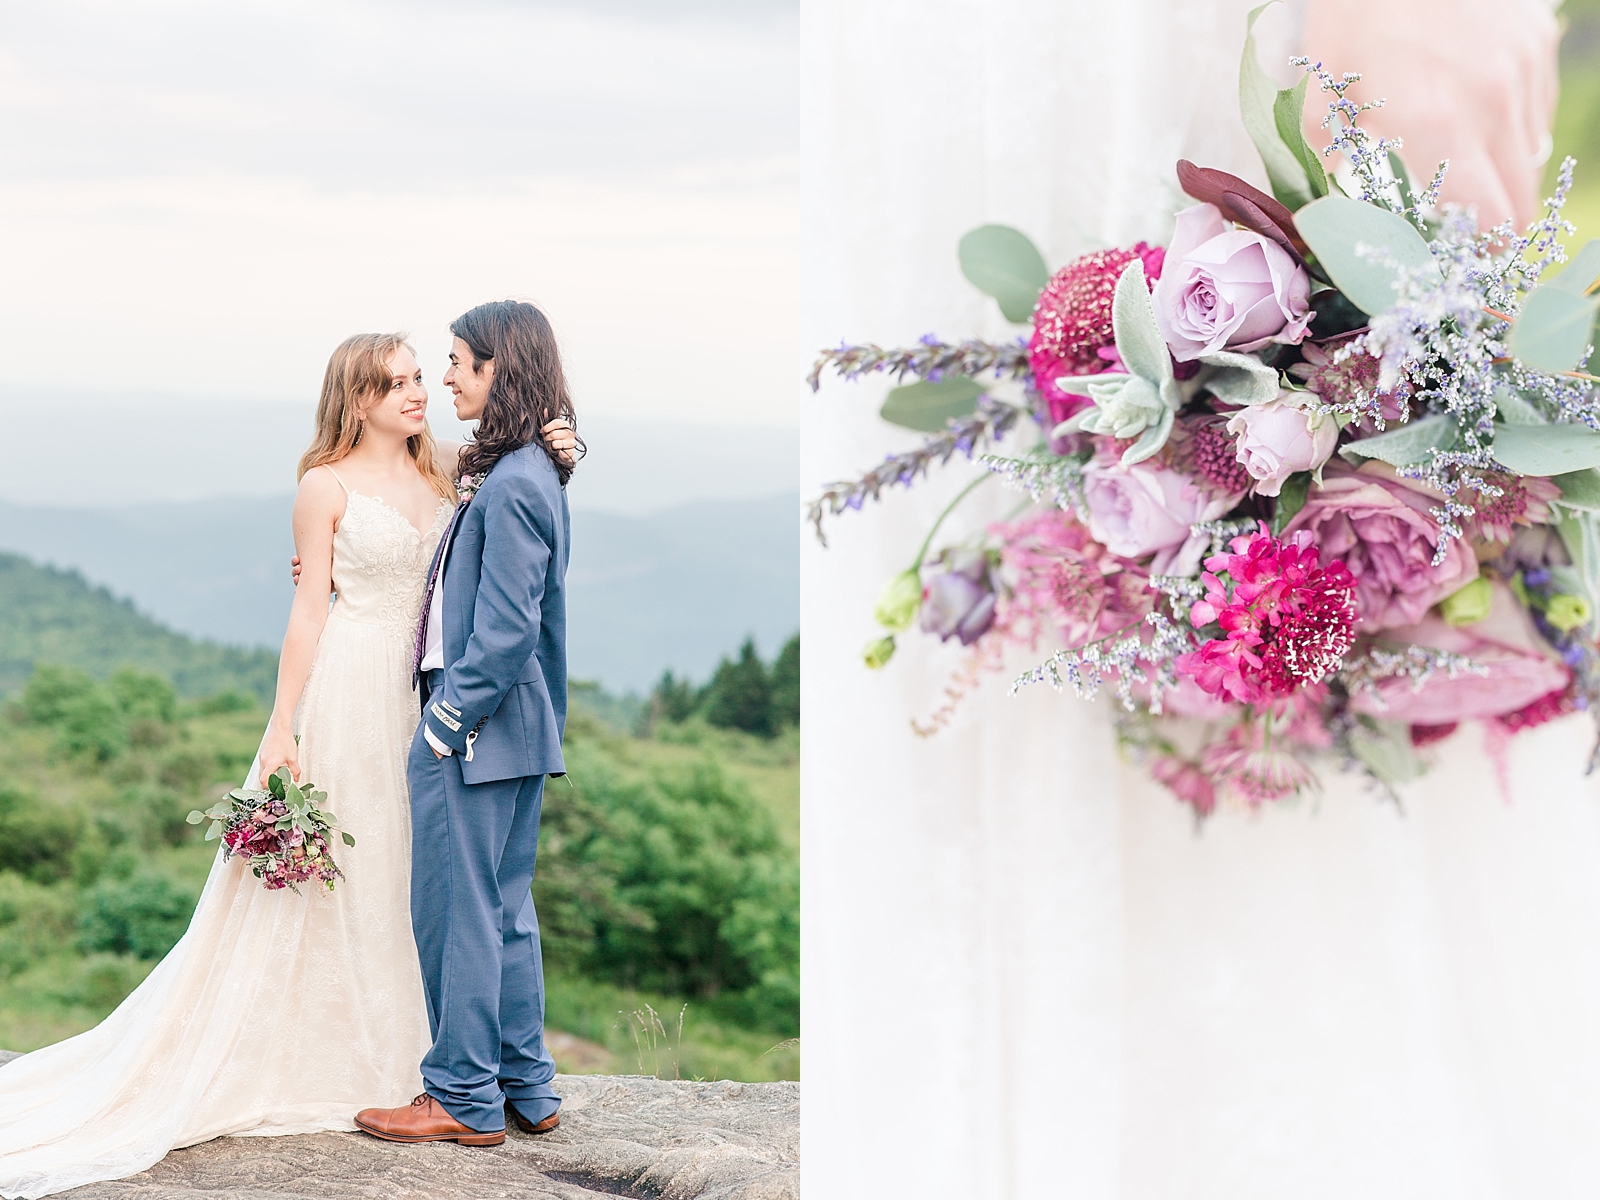 Black Balsam Knob Elopement Andrew and Emma looking at each other and flower detail Photos 